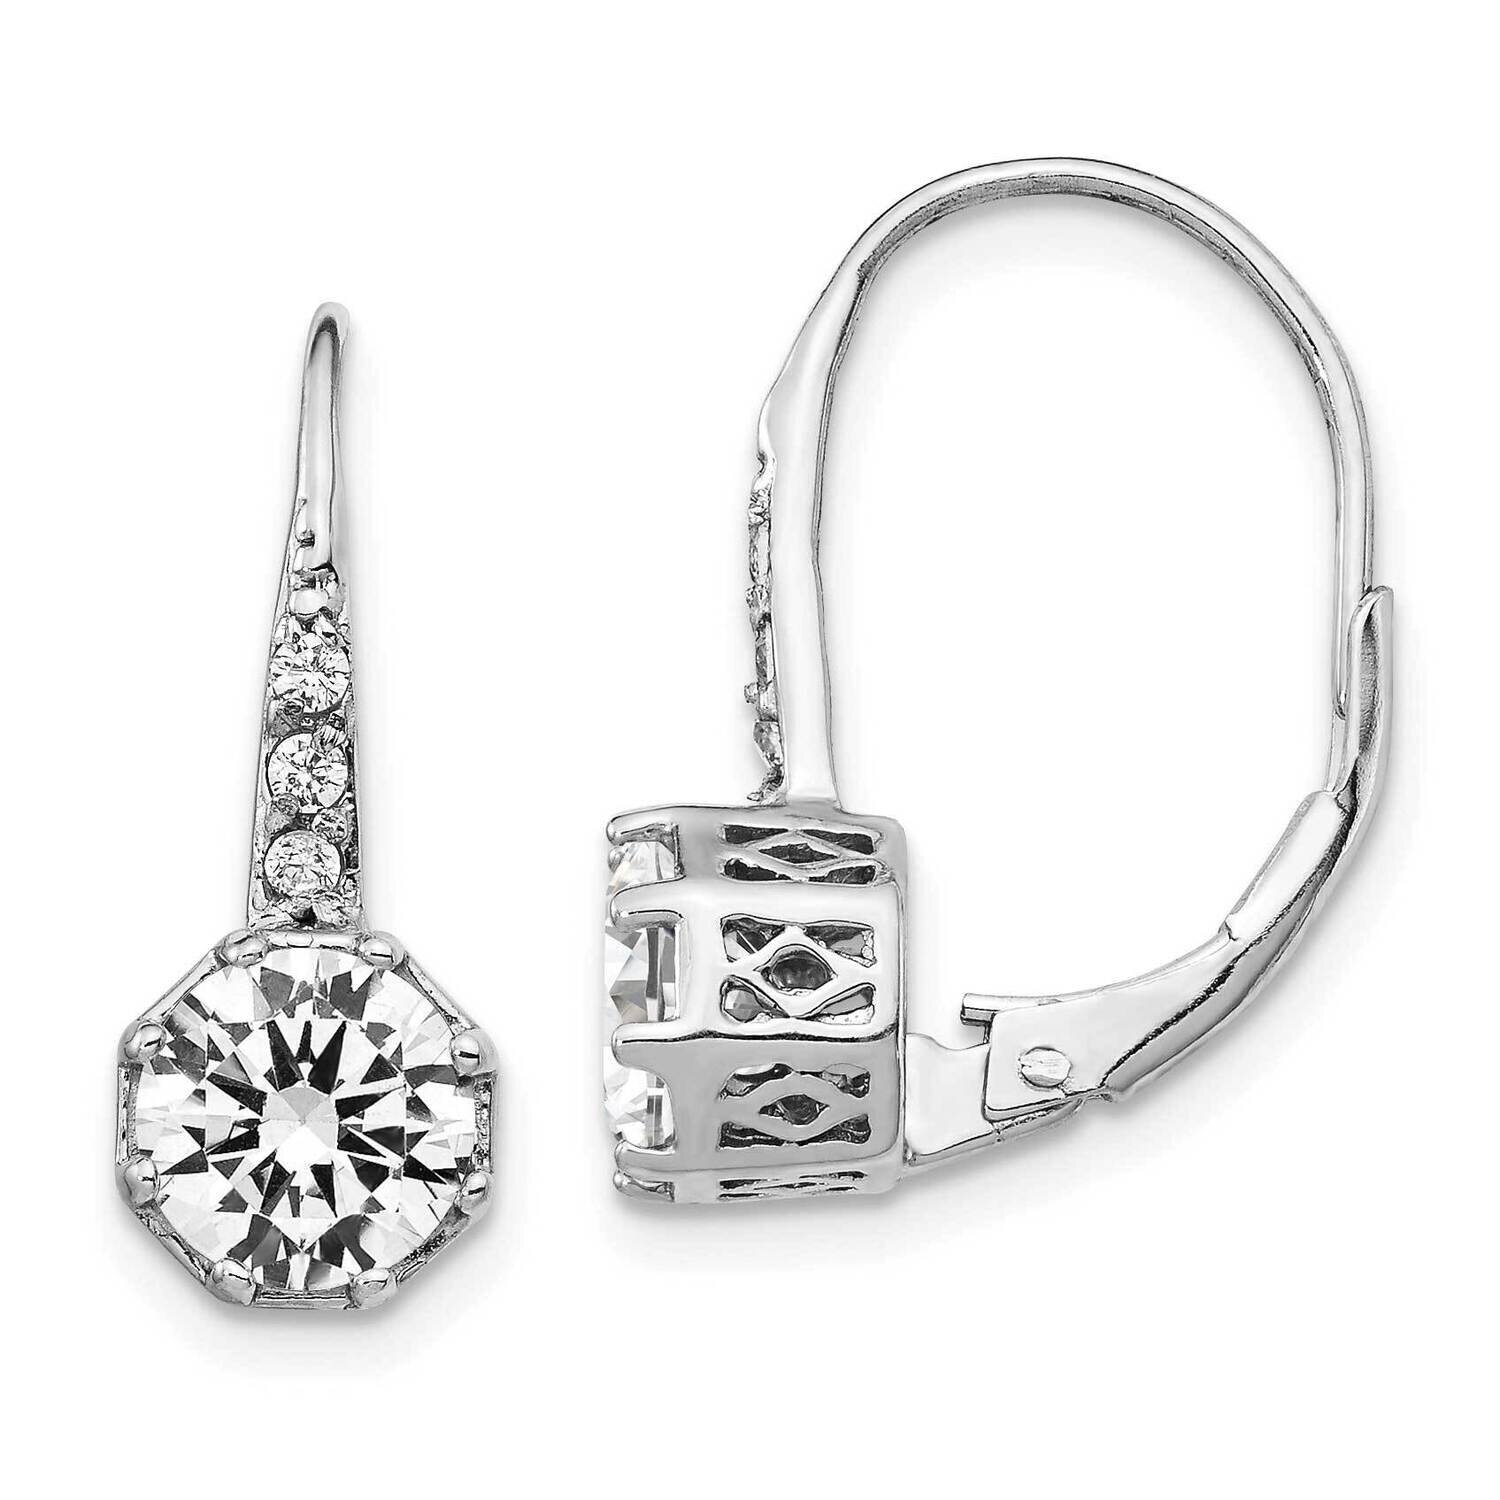 Polished CZ Diamond Leverback Earrings Sterling Silver Rhodium Plated QCM1416